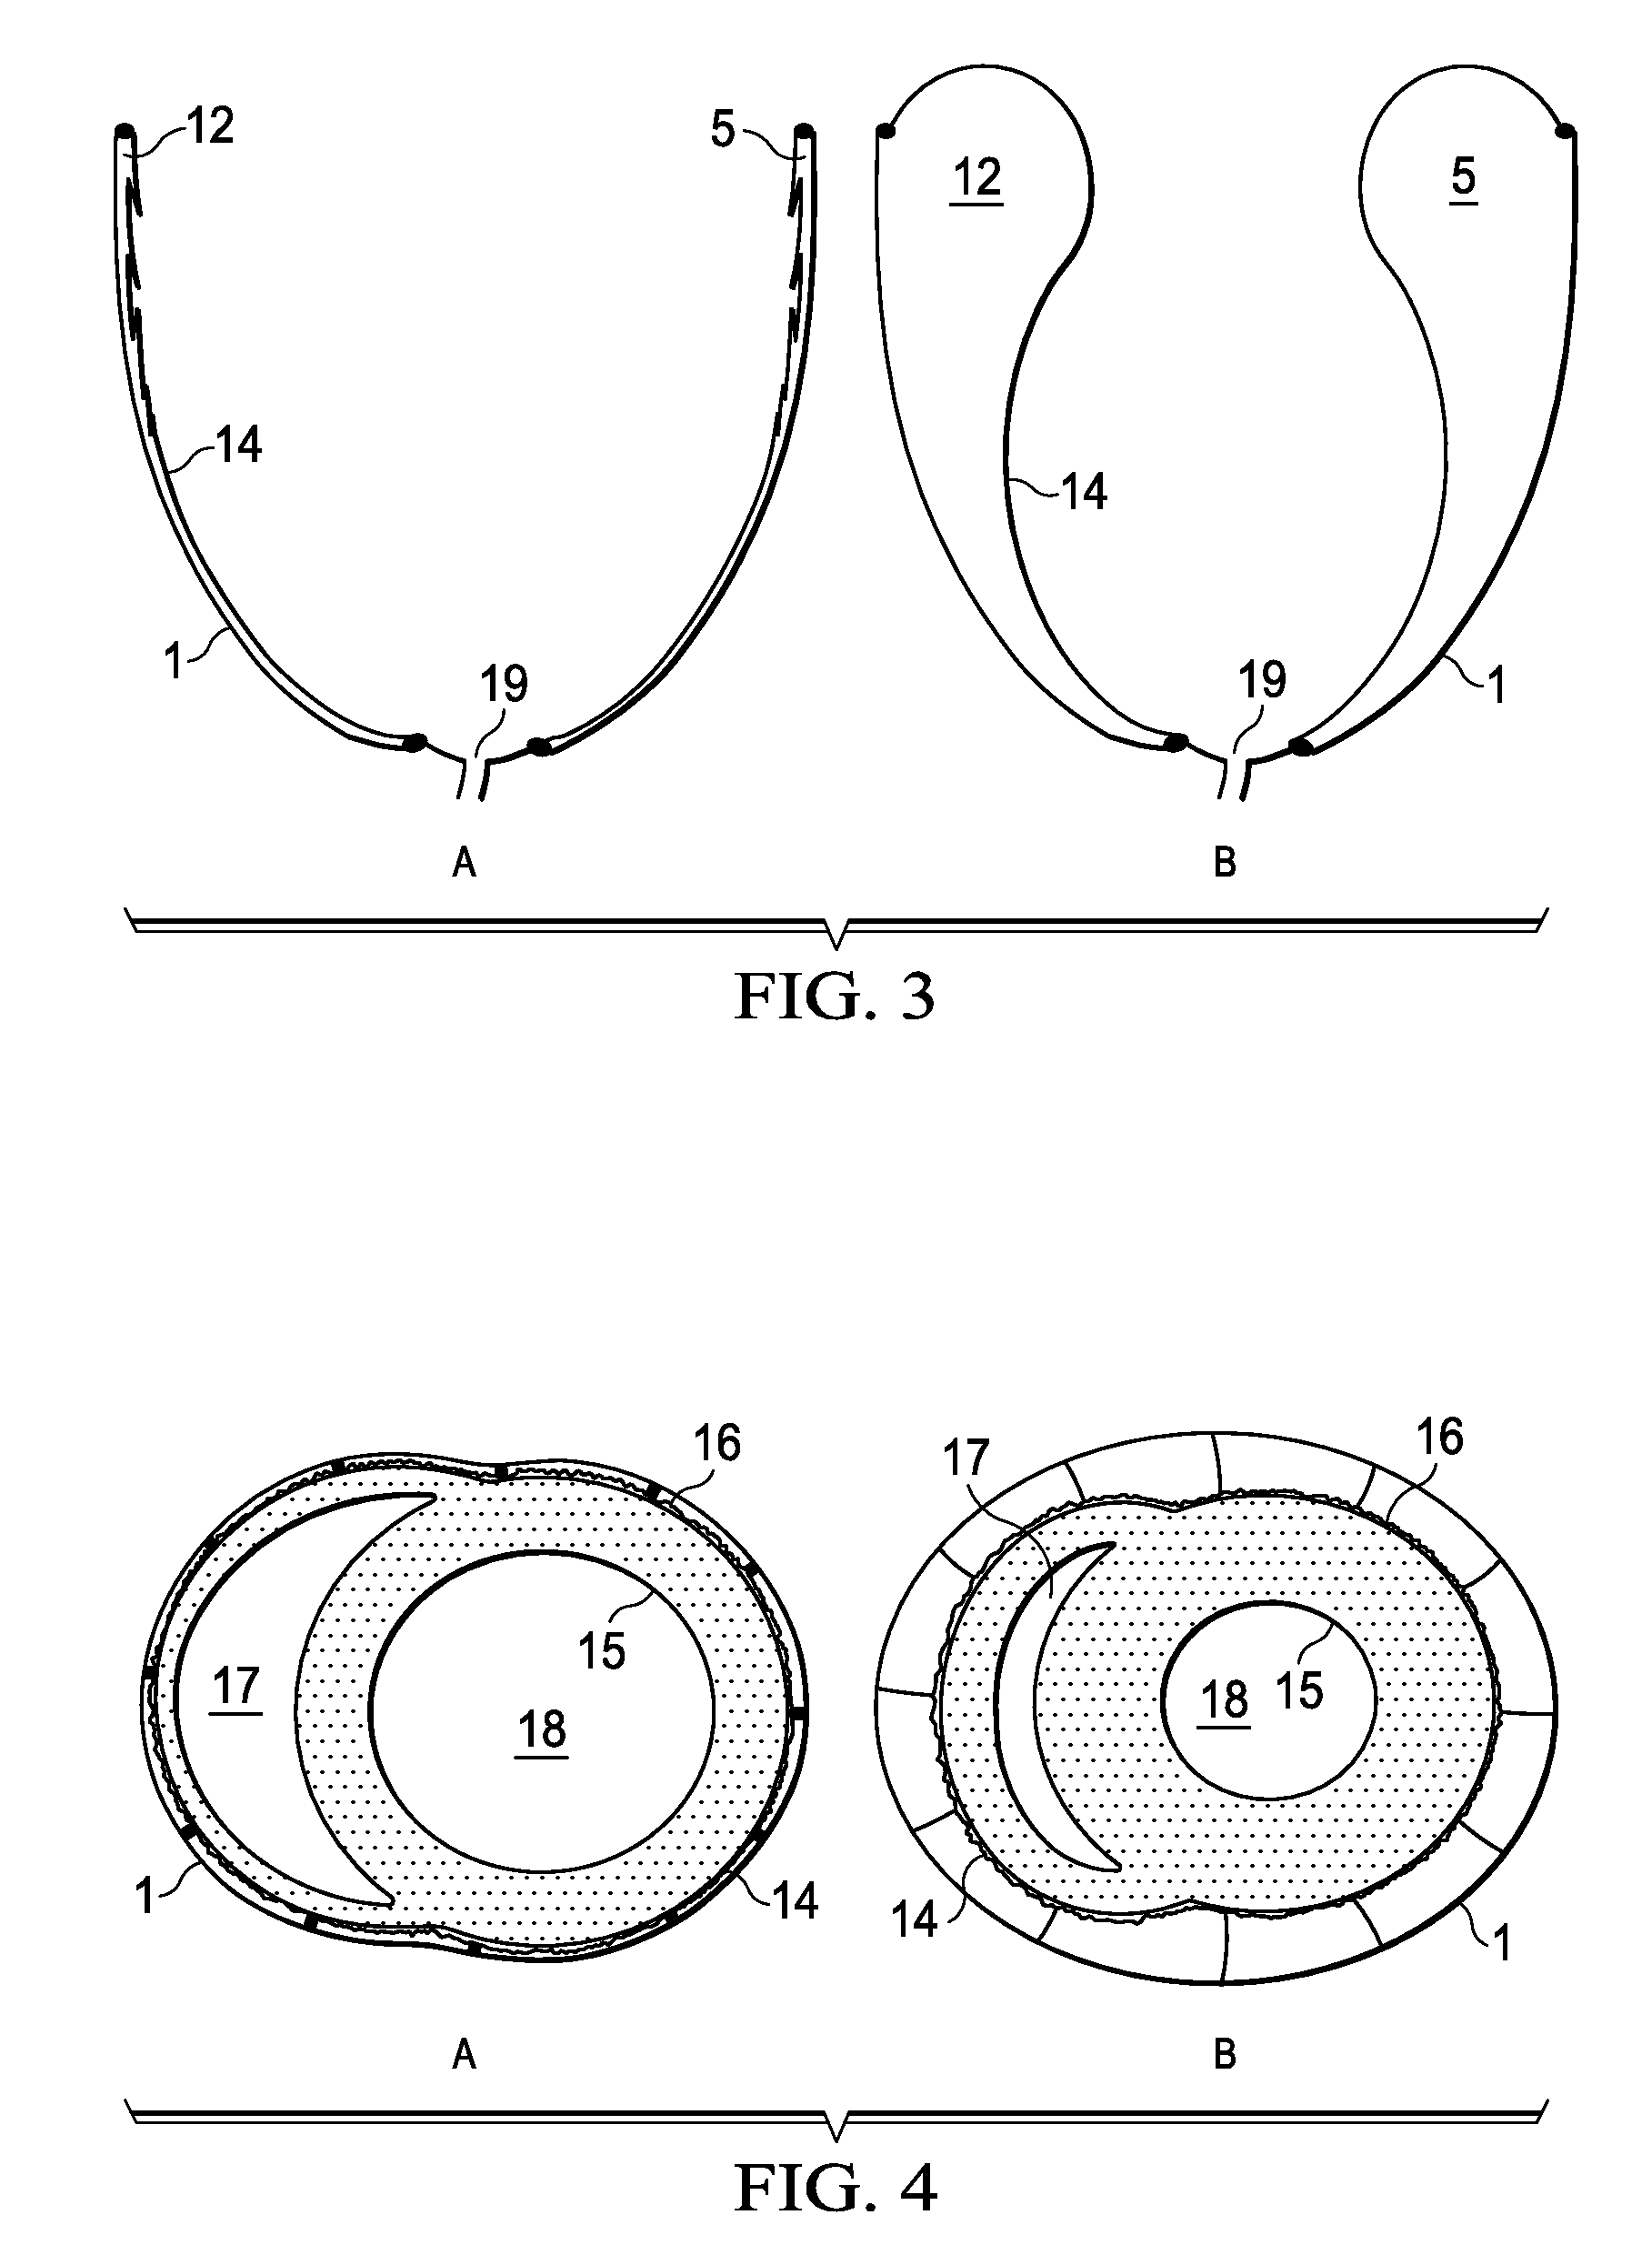 Biphasic and Dynamic Adjustable Support Devices and Methods with Assist and Recoil Capabilities for Treatment of Cardiac Pathologies